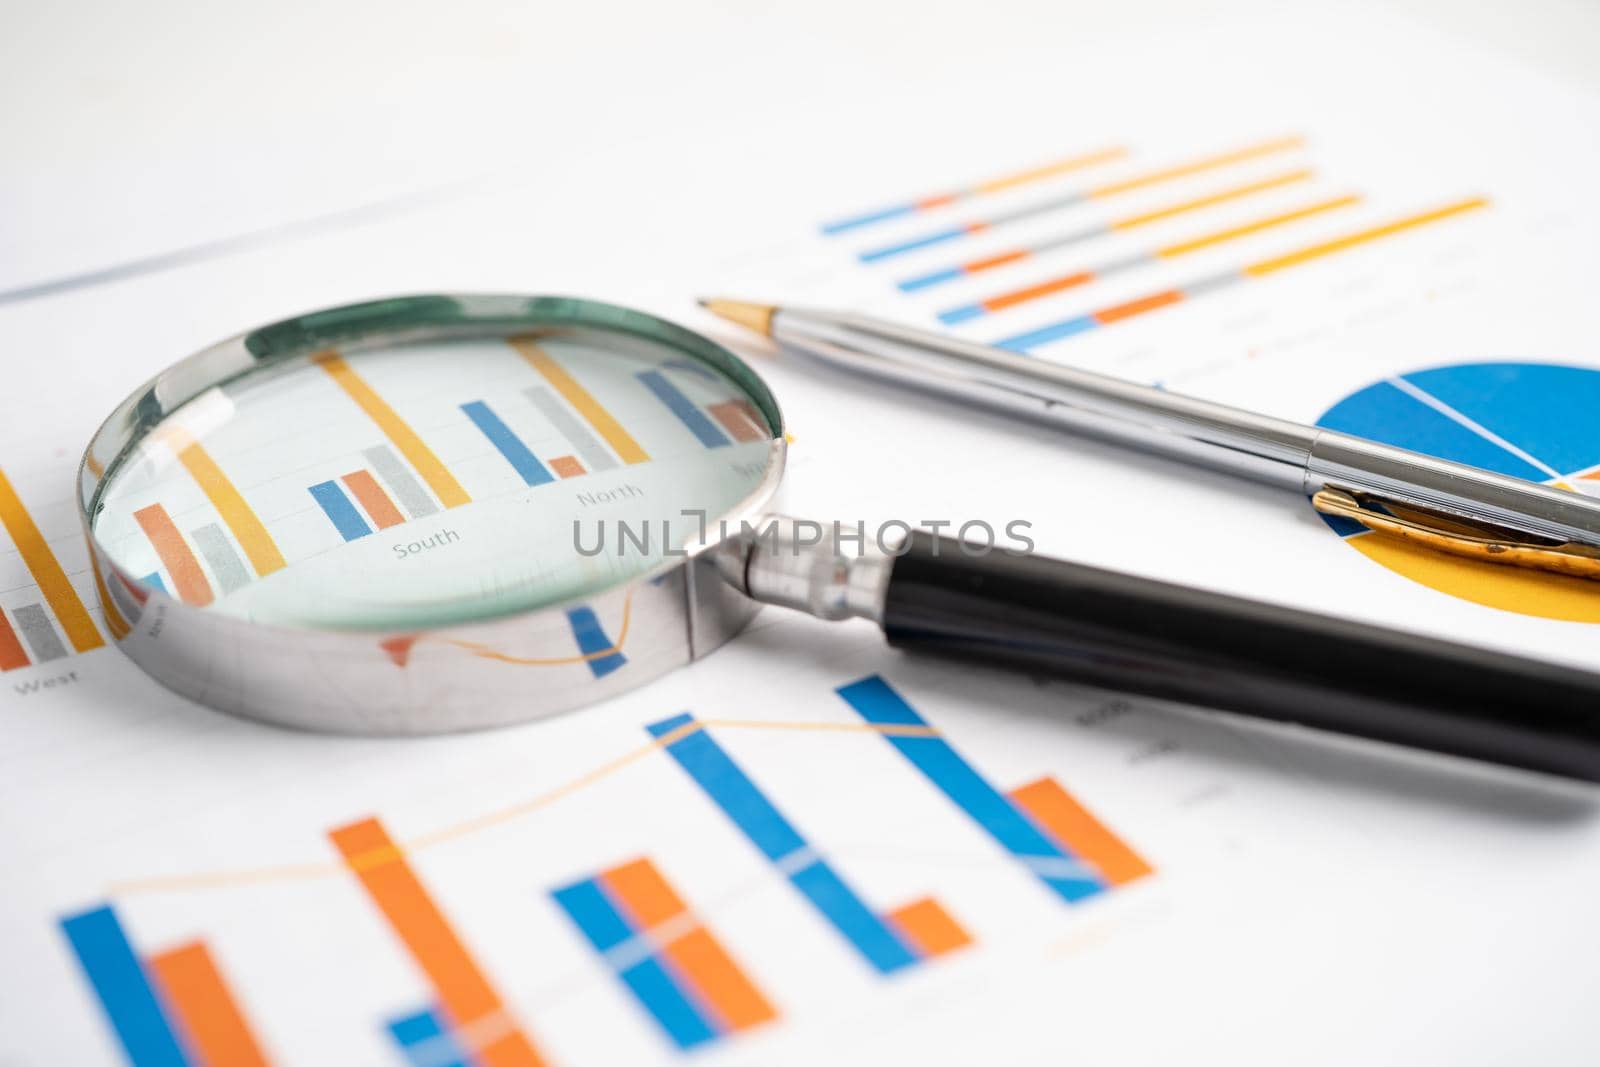 Magnifying glass on charts graphs paper. Financial development, Banking Account, Statistics, Investment Analytic research data economy, Stock exchange trading, Business office company meeting concept. by pamai